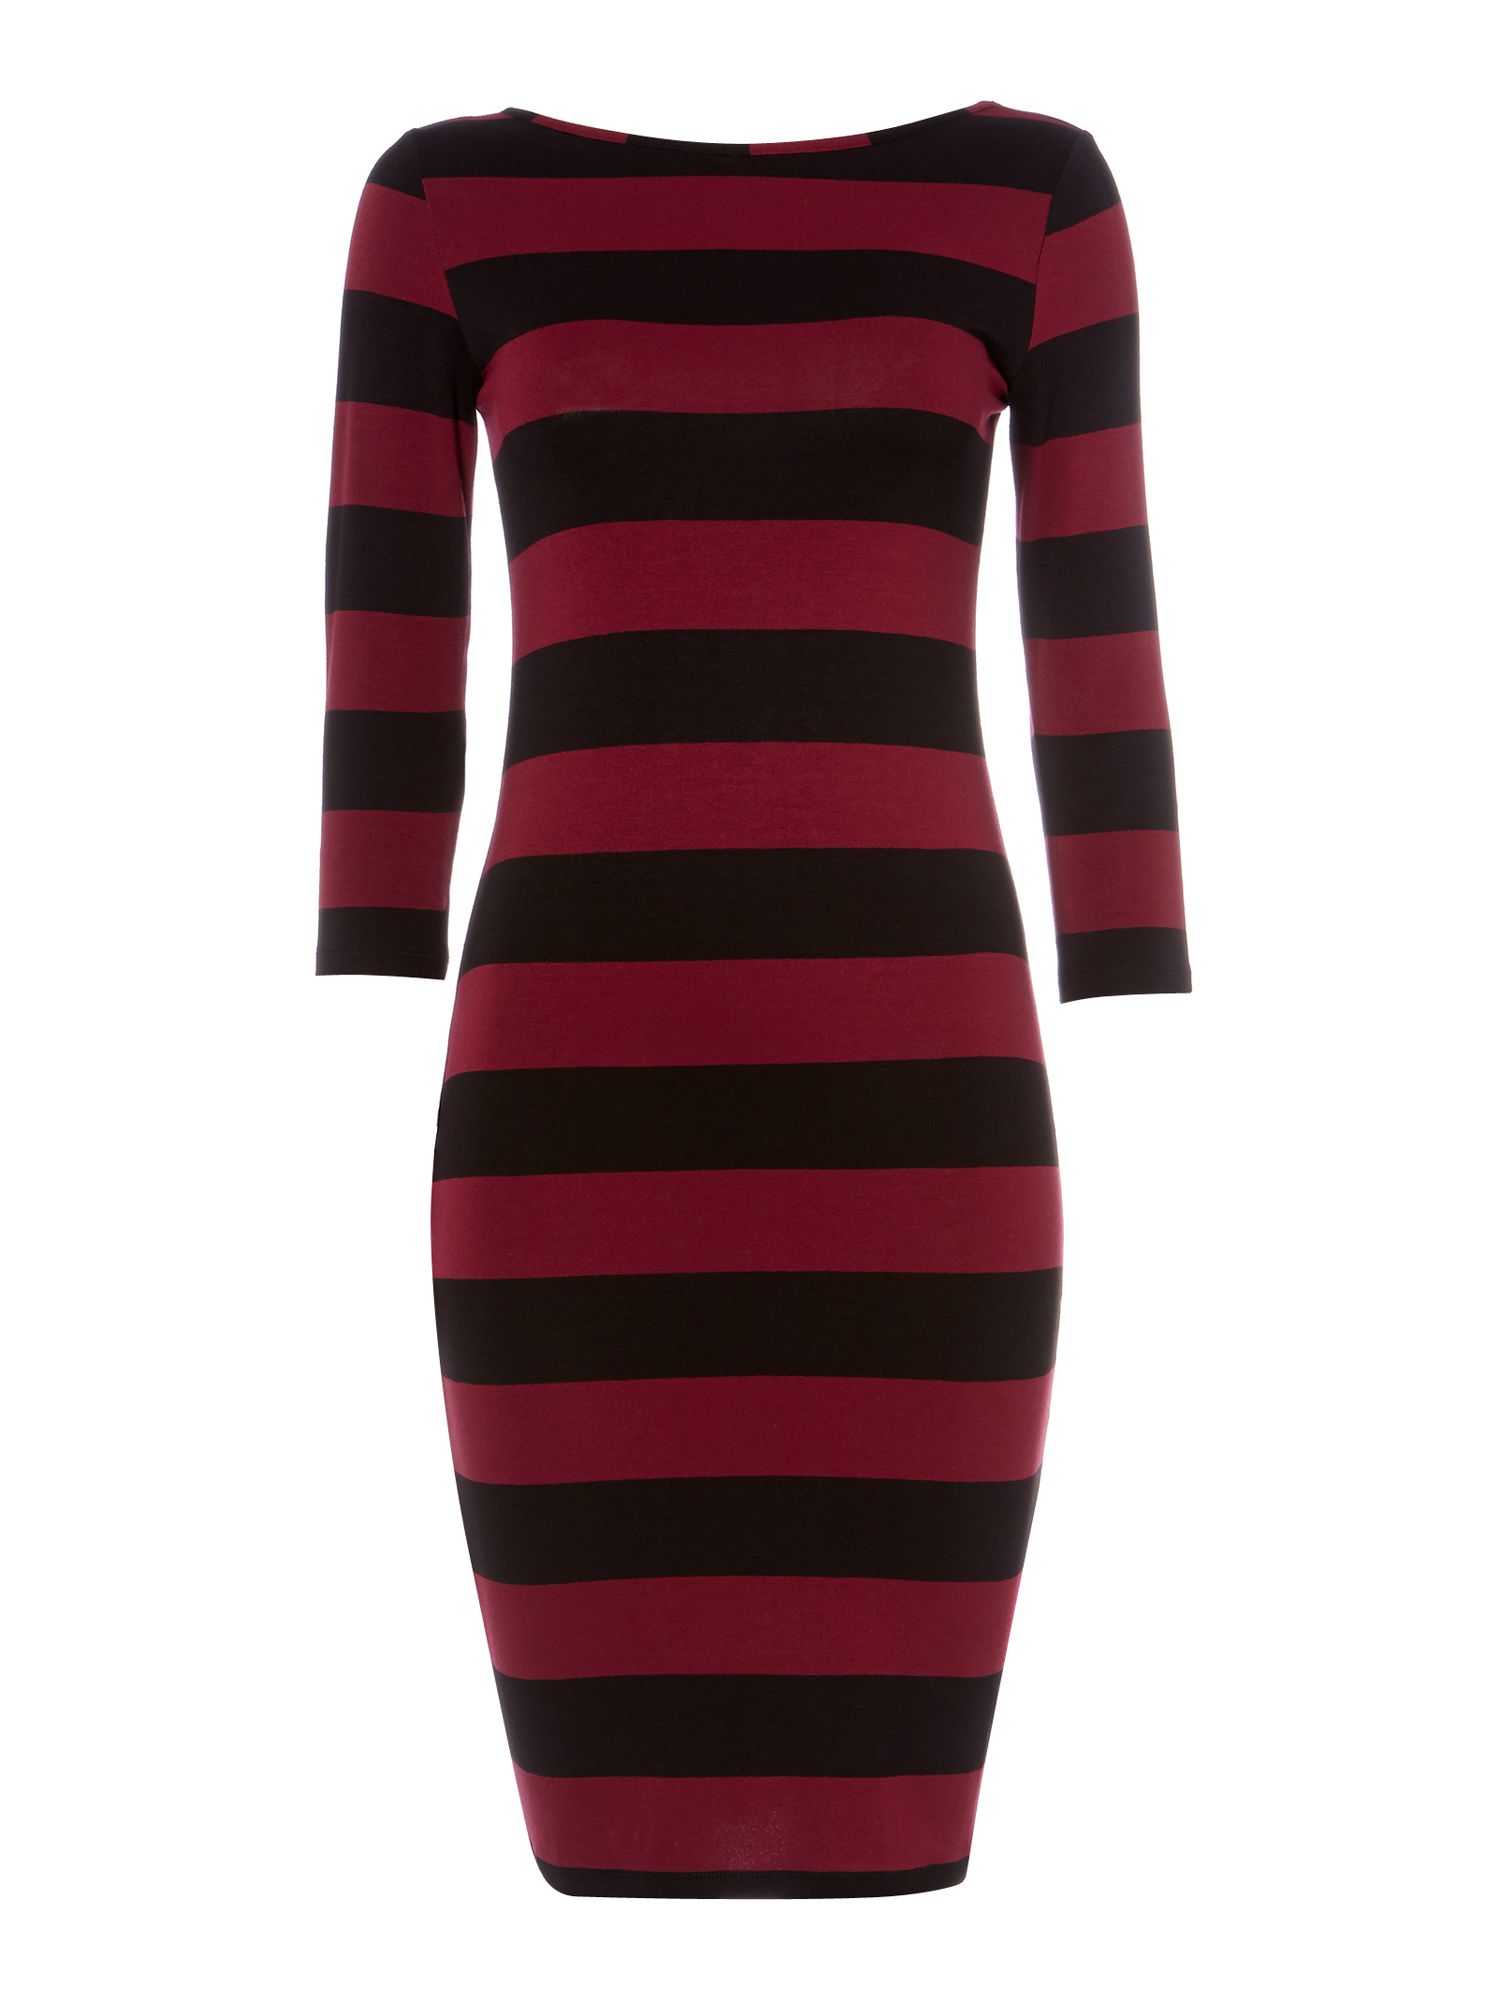 Therapy Even Stripe Tube Dress in Red (Burgundy) | Lyst